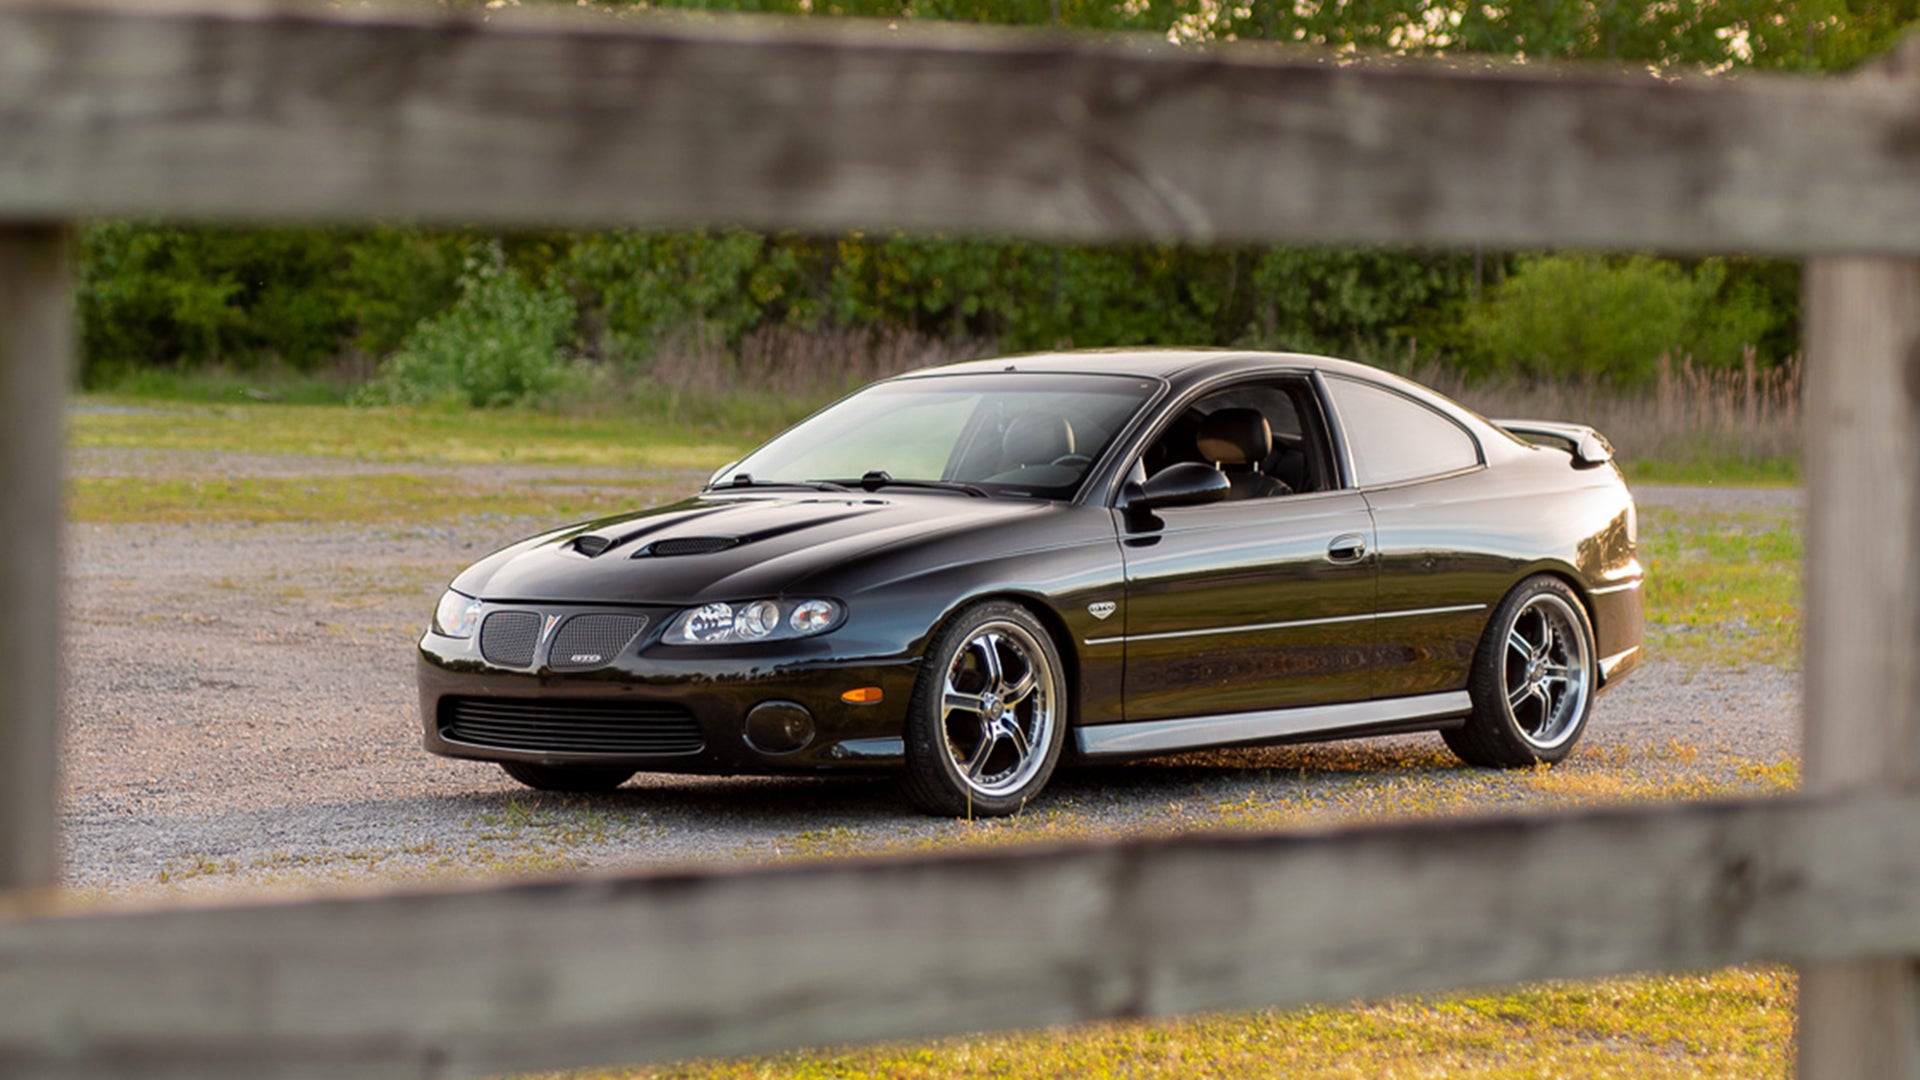 2006 Pontiac GTO 6 0 Review Power for the Proletariat The Drive